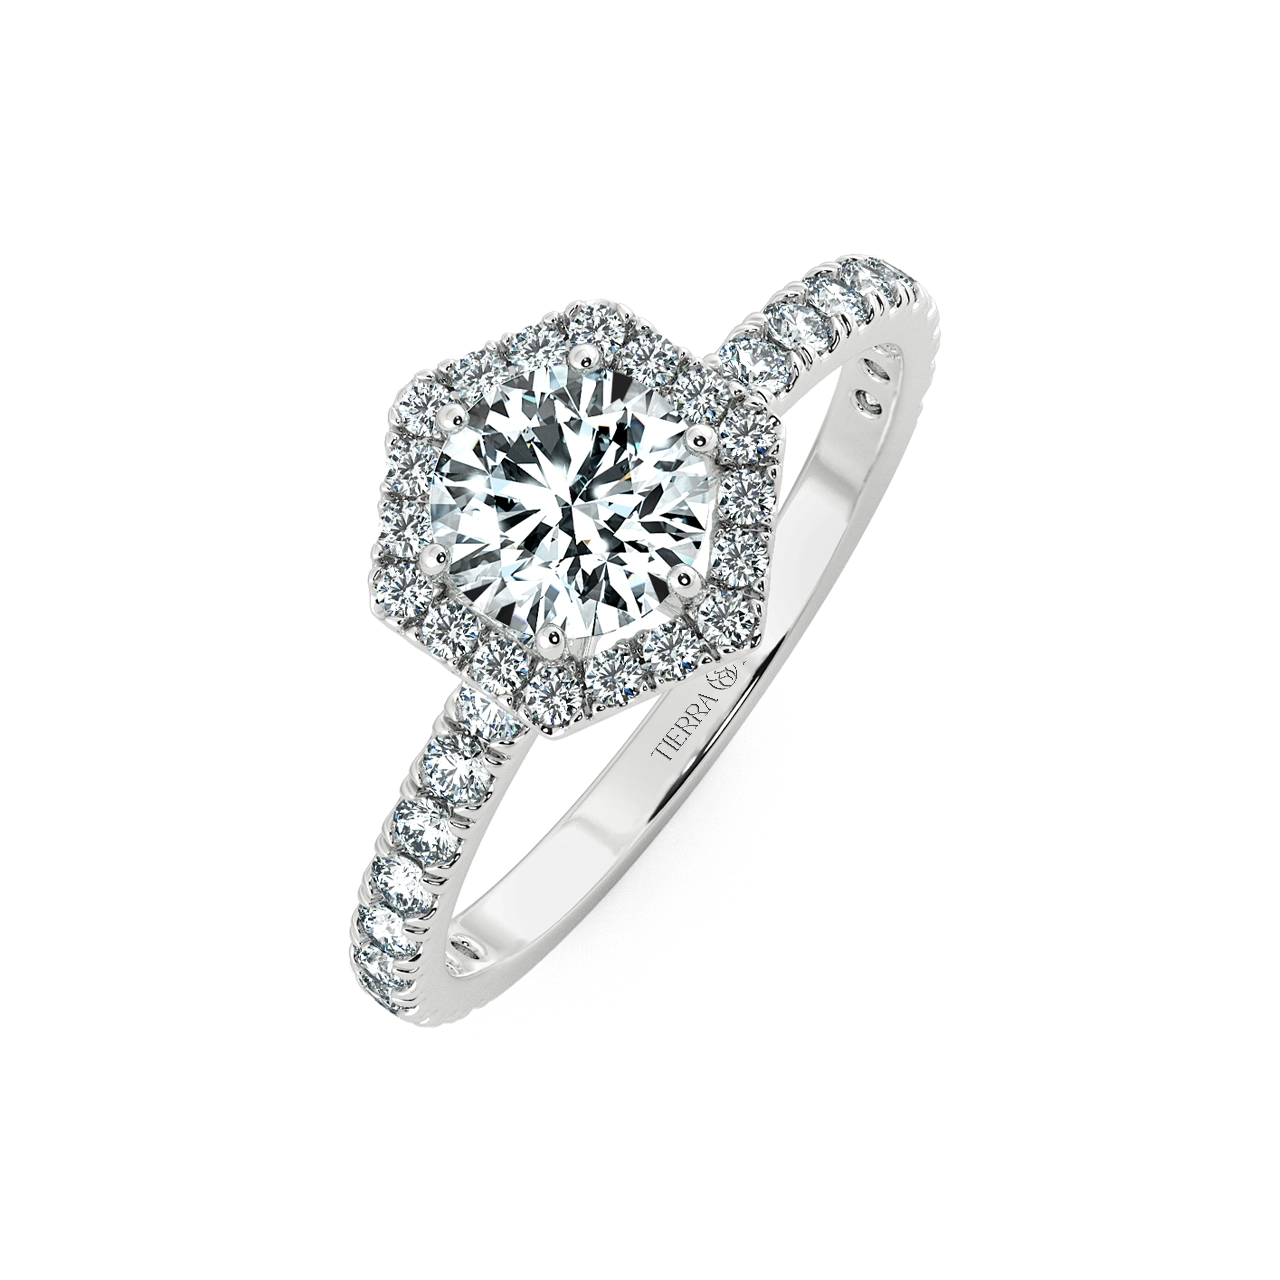 Hexagonal Halo Engagement Ring with Enternity Band NCH2206 3